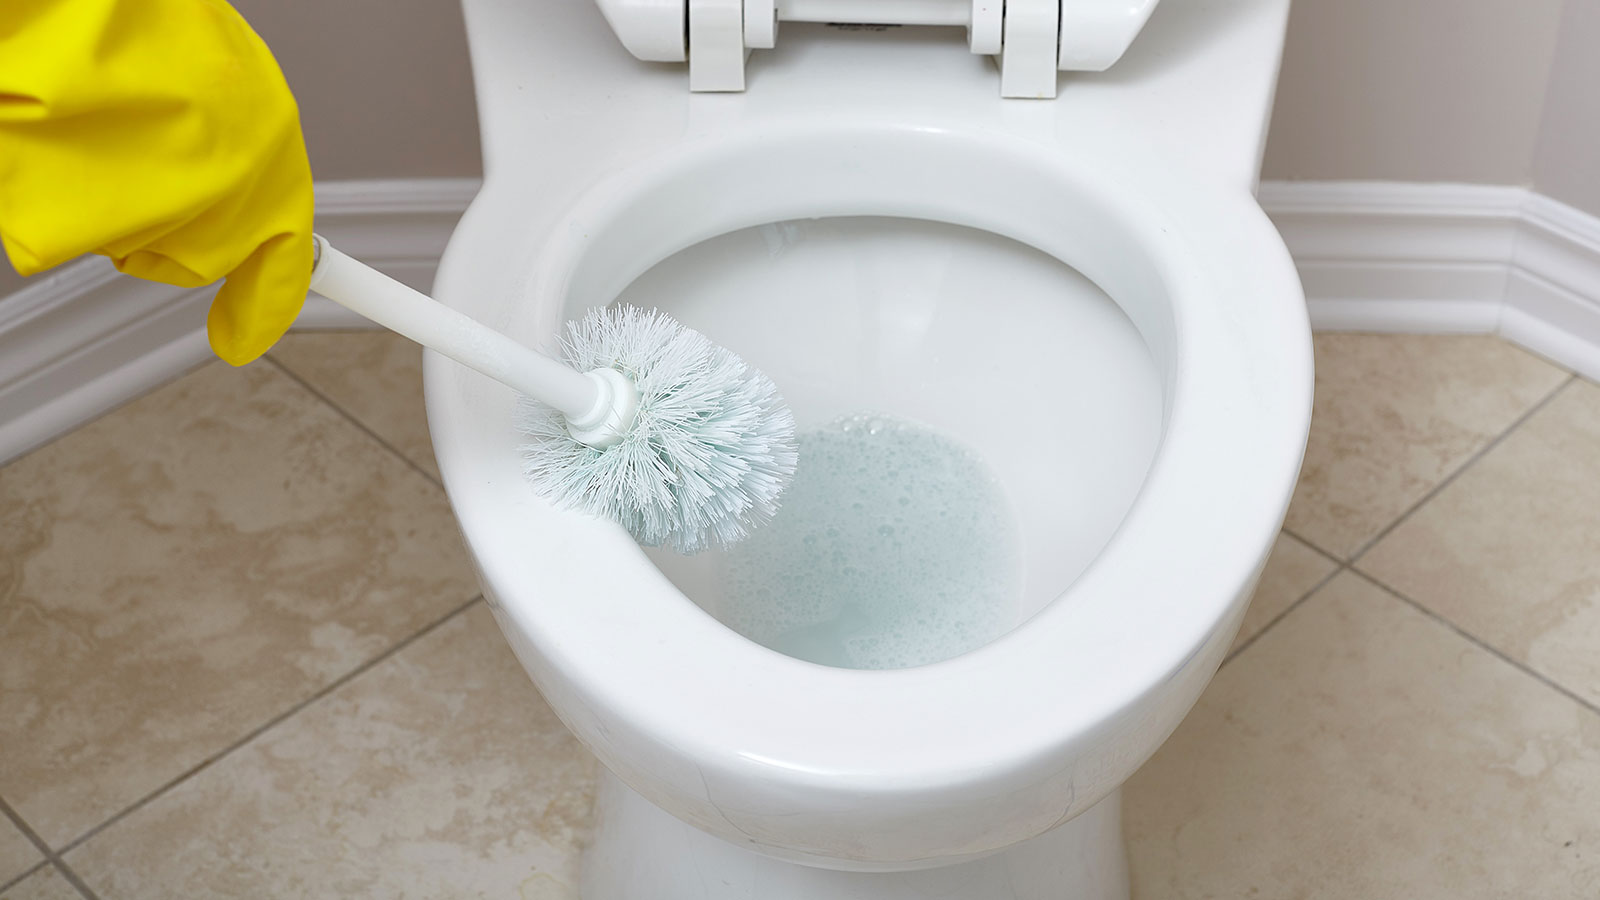 How To Remove Mold From Toilet Seat